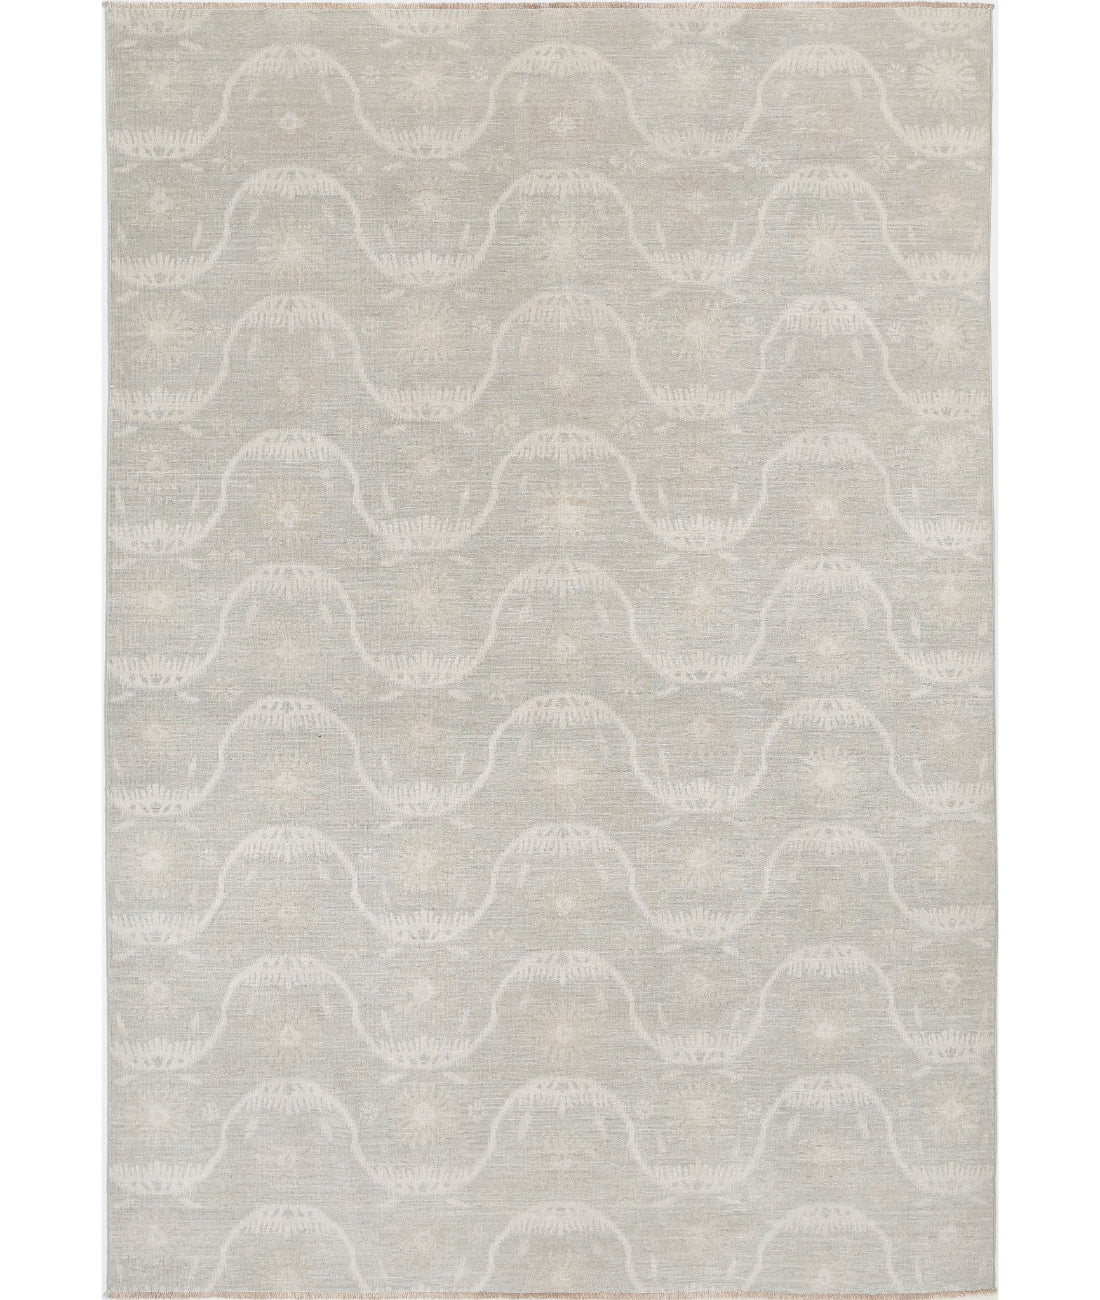 Hand Knotted Ikat Wool Rug - 6'3'' x 9'0'' 6'3'' x 9'0'' (188 X 270) / Ivory / Grey